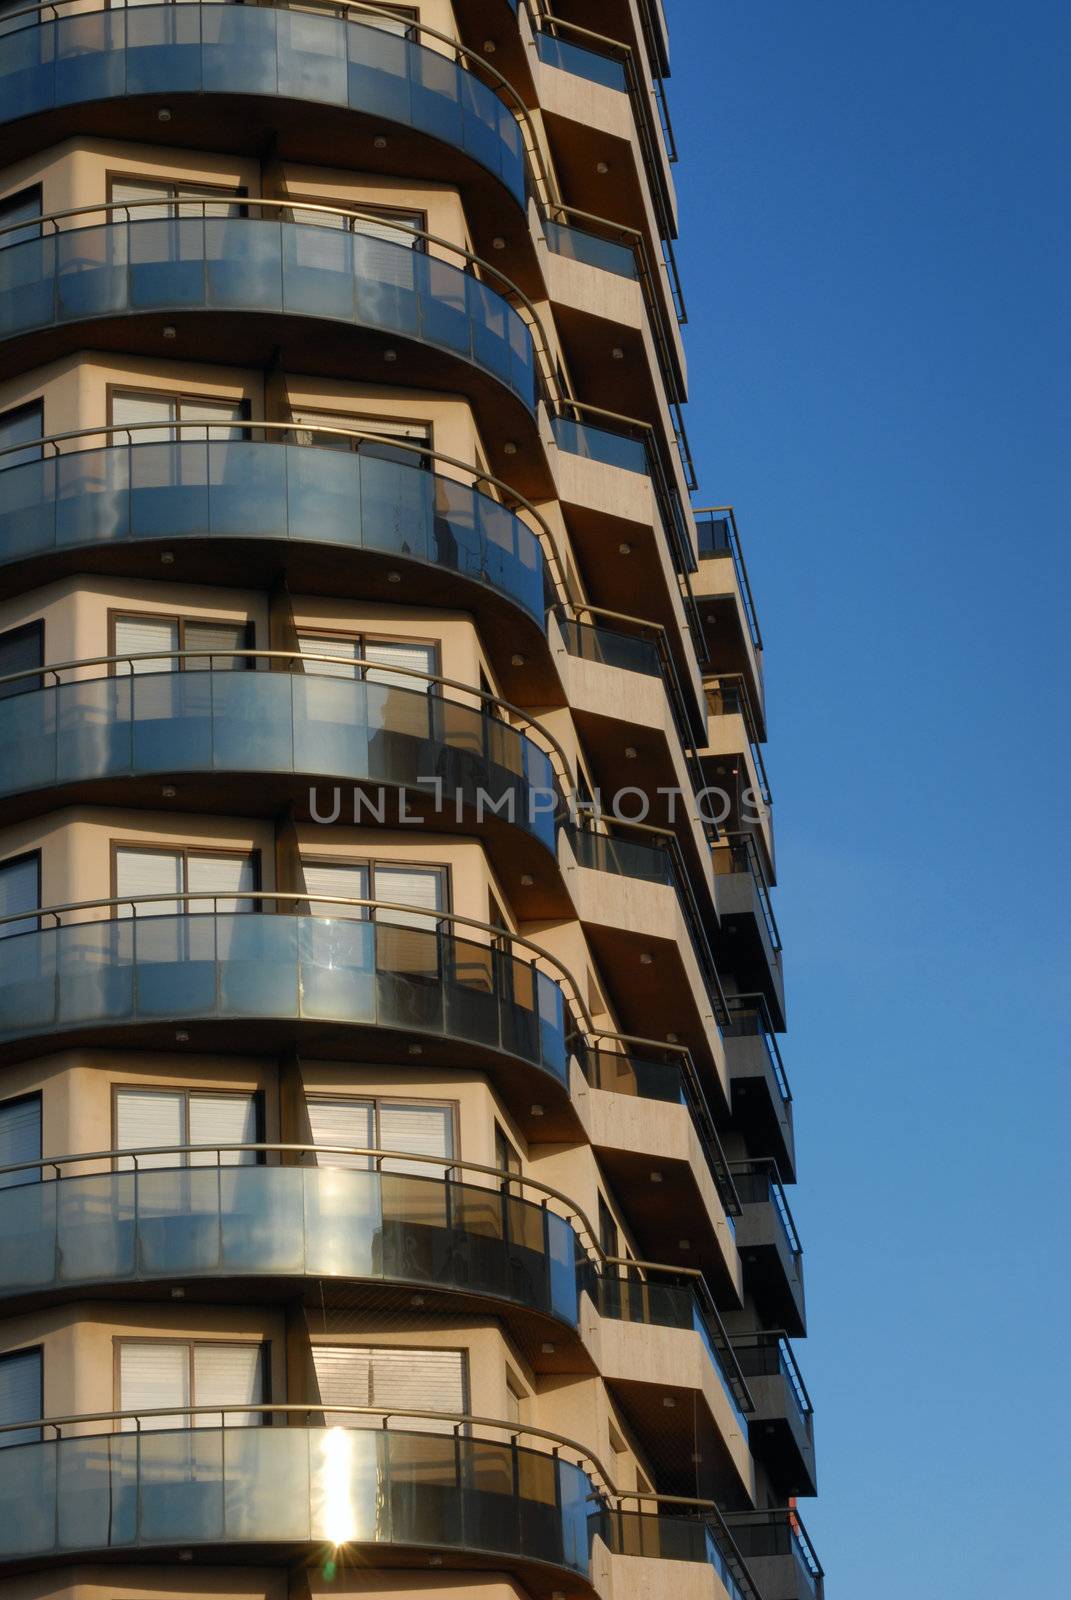 Building balconies on a blue sky by cienpies